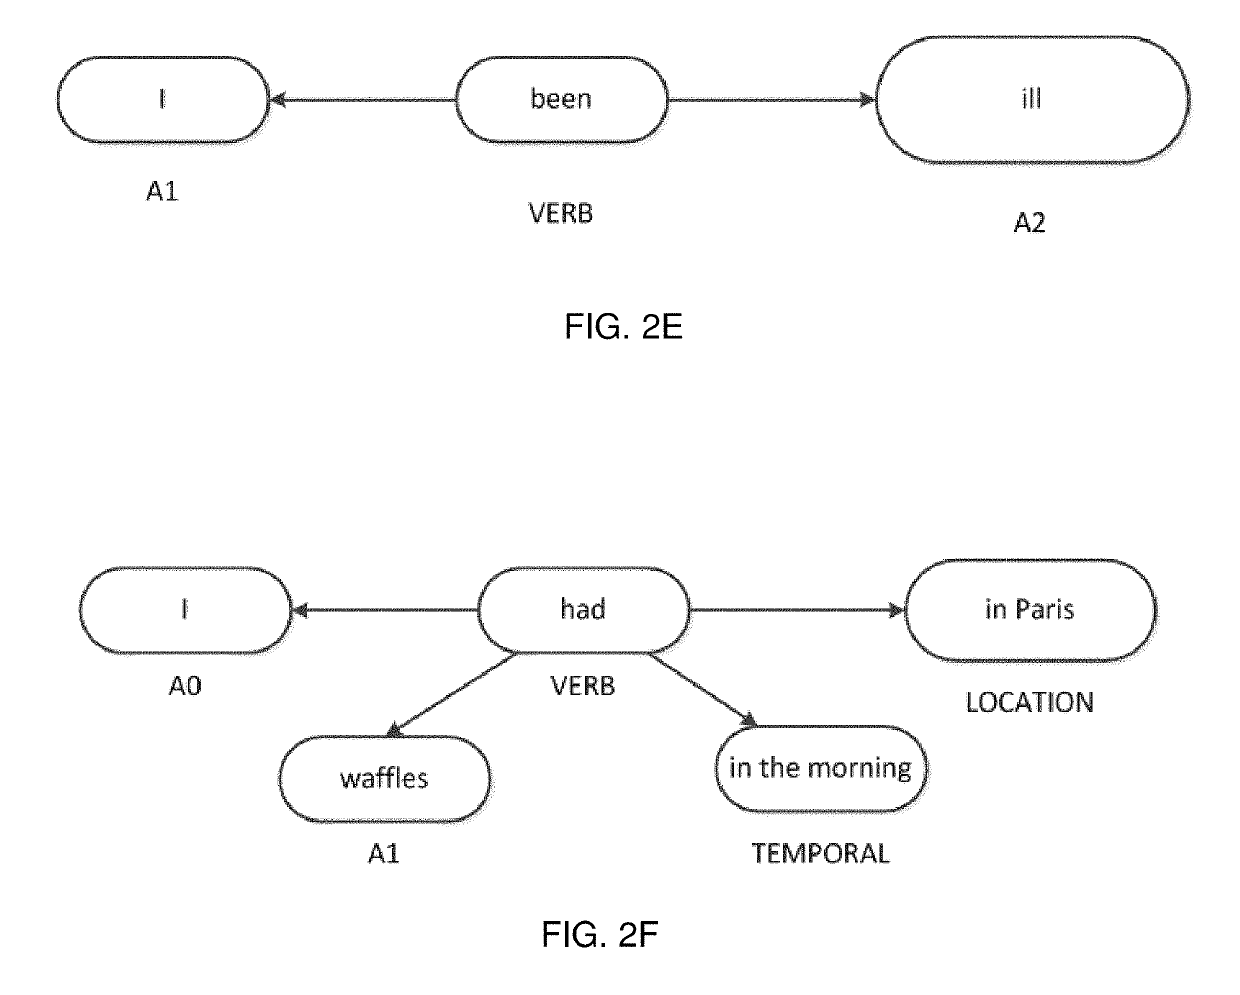 Semantic graph traversal for recognition of inferred clauses within natural language inputs